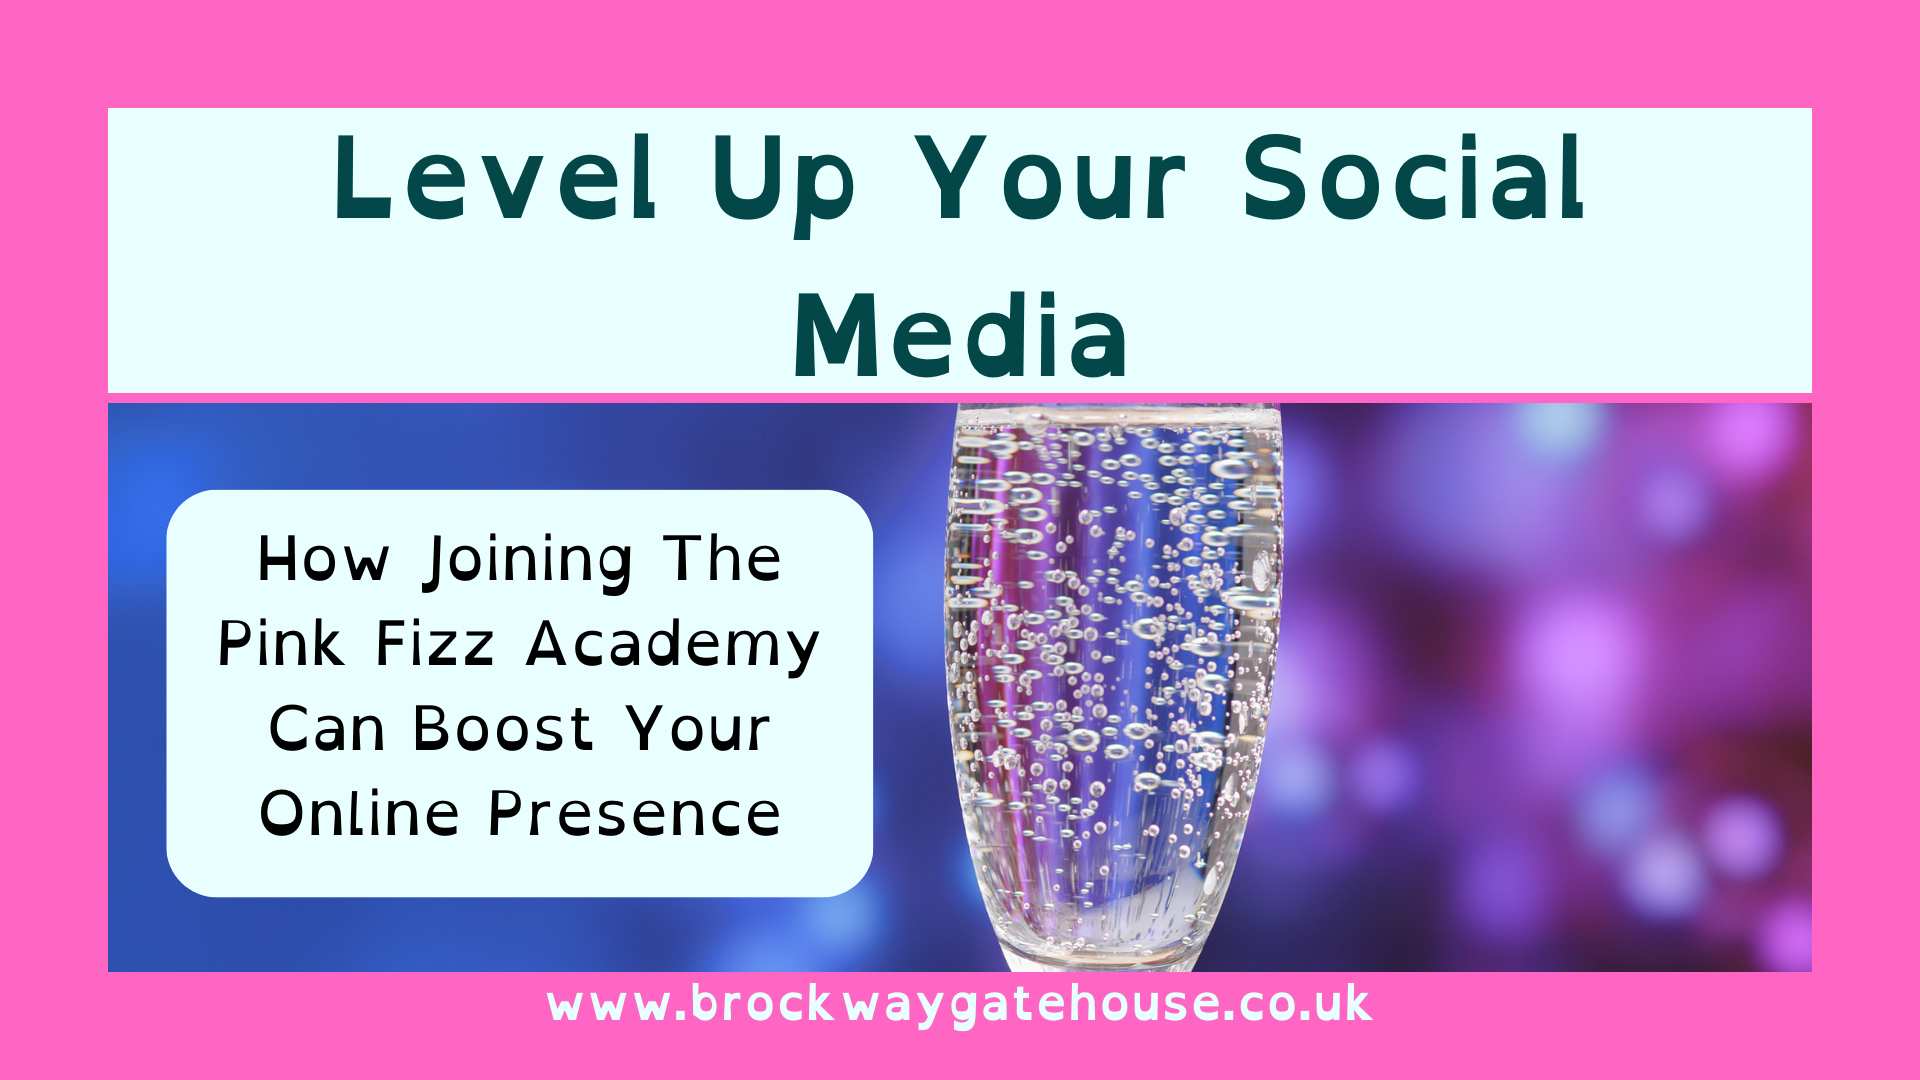 Level Up Your Social Media: How Joining The Pink Fizz Academy Can Boost Your Online Presence